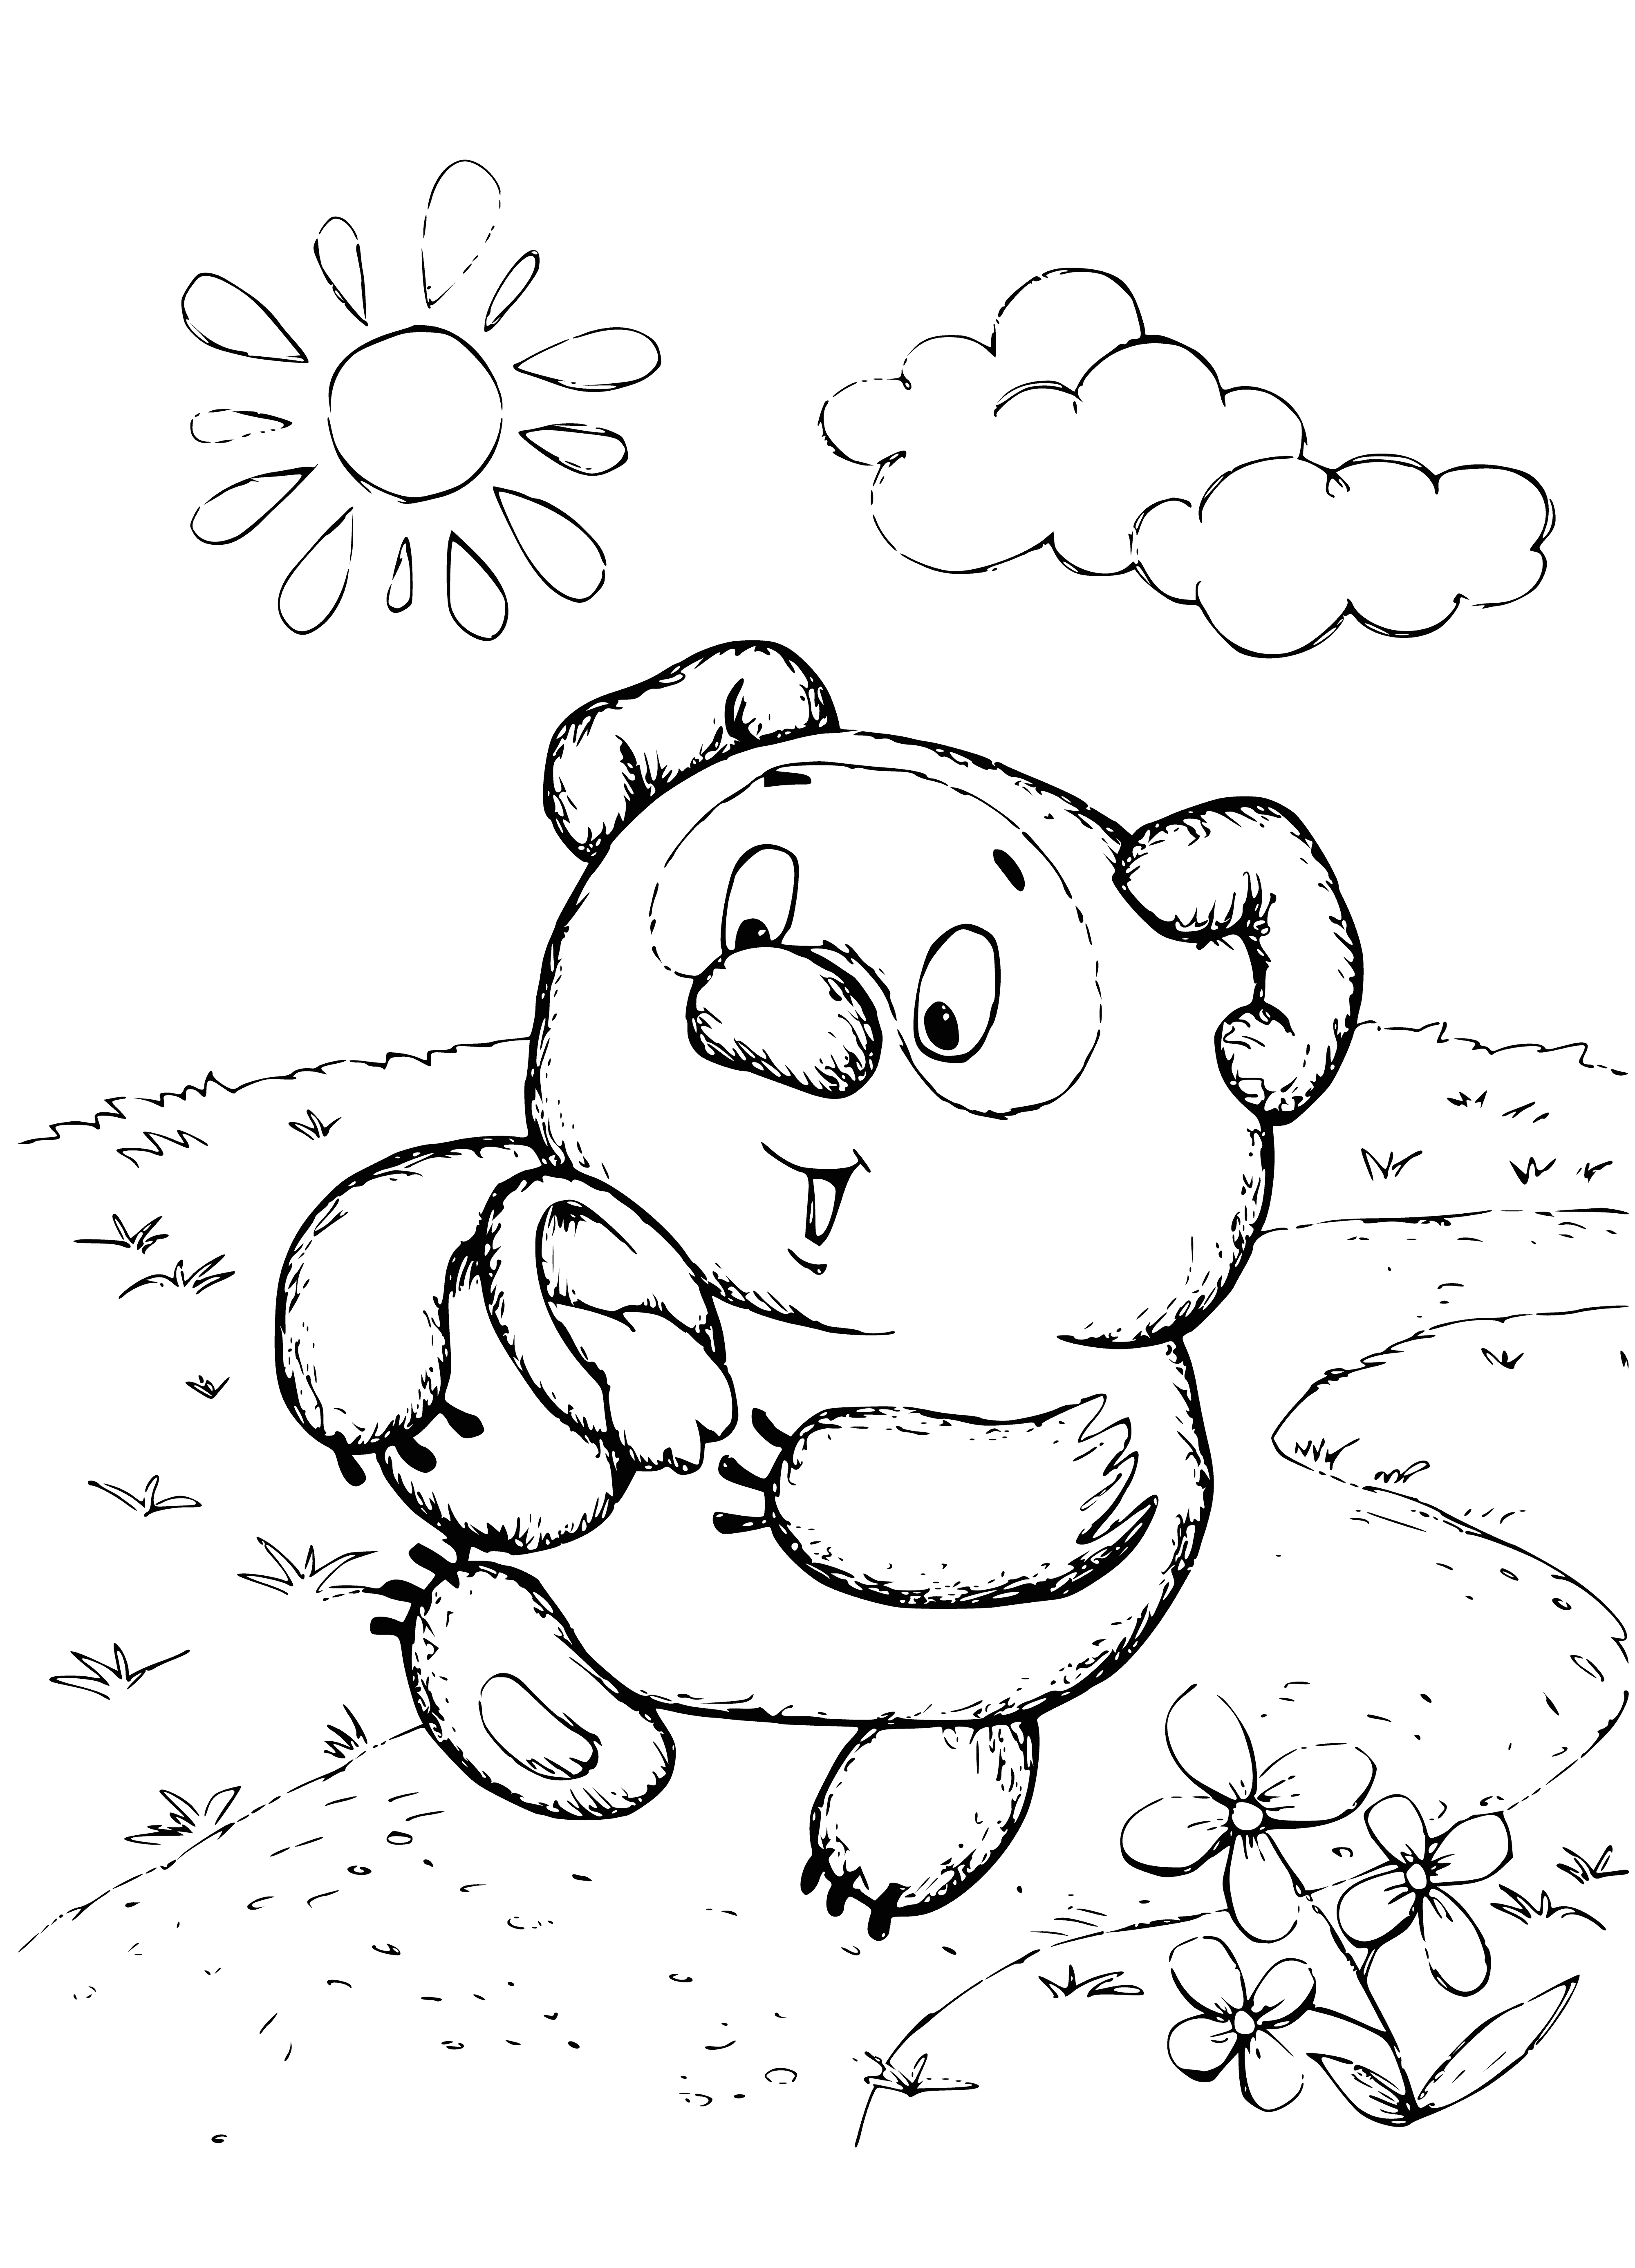 coloring page: Creature happily eats honey from large pot in coloring page - spoon in hand! #yum